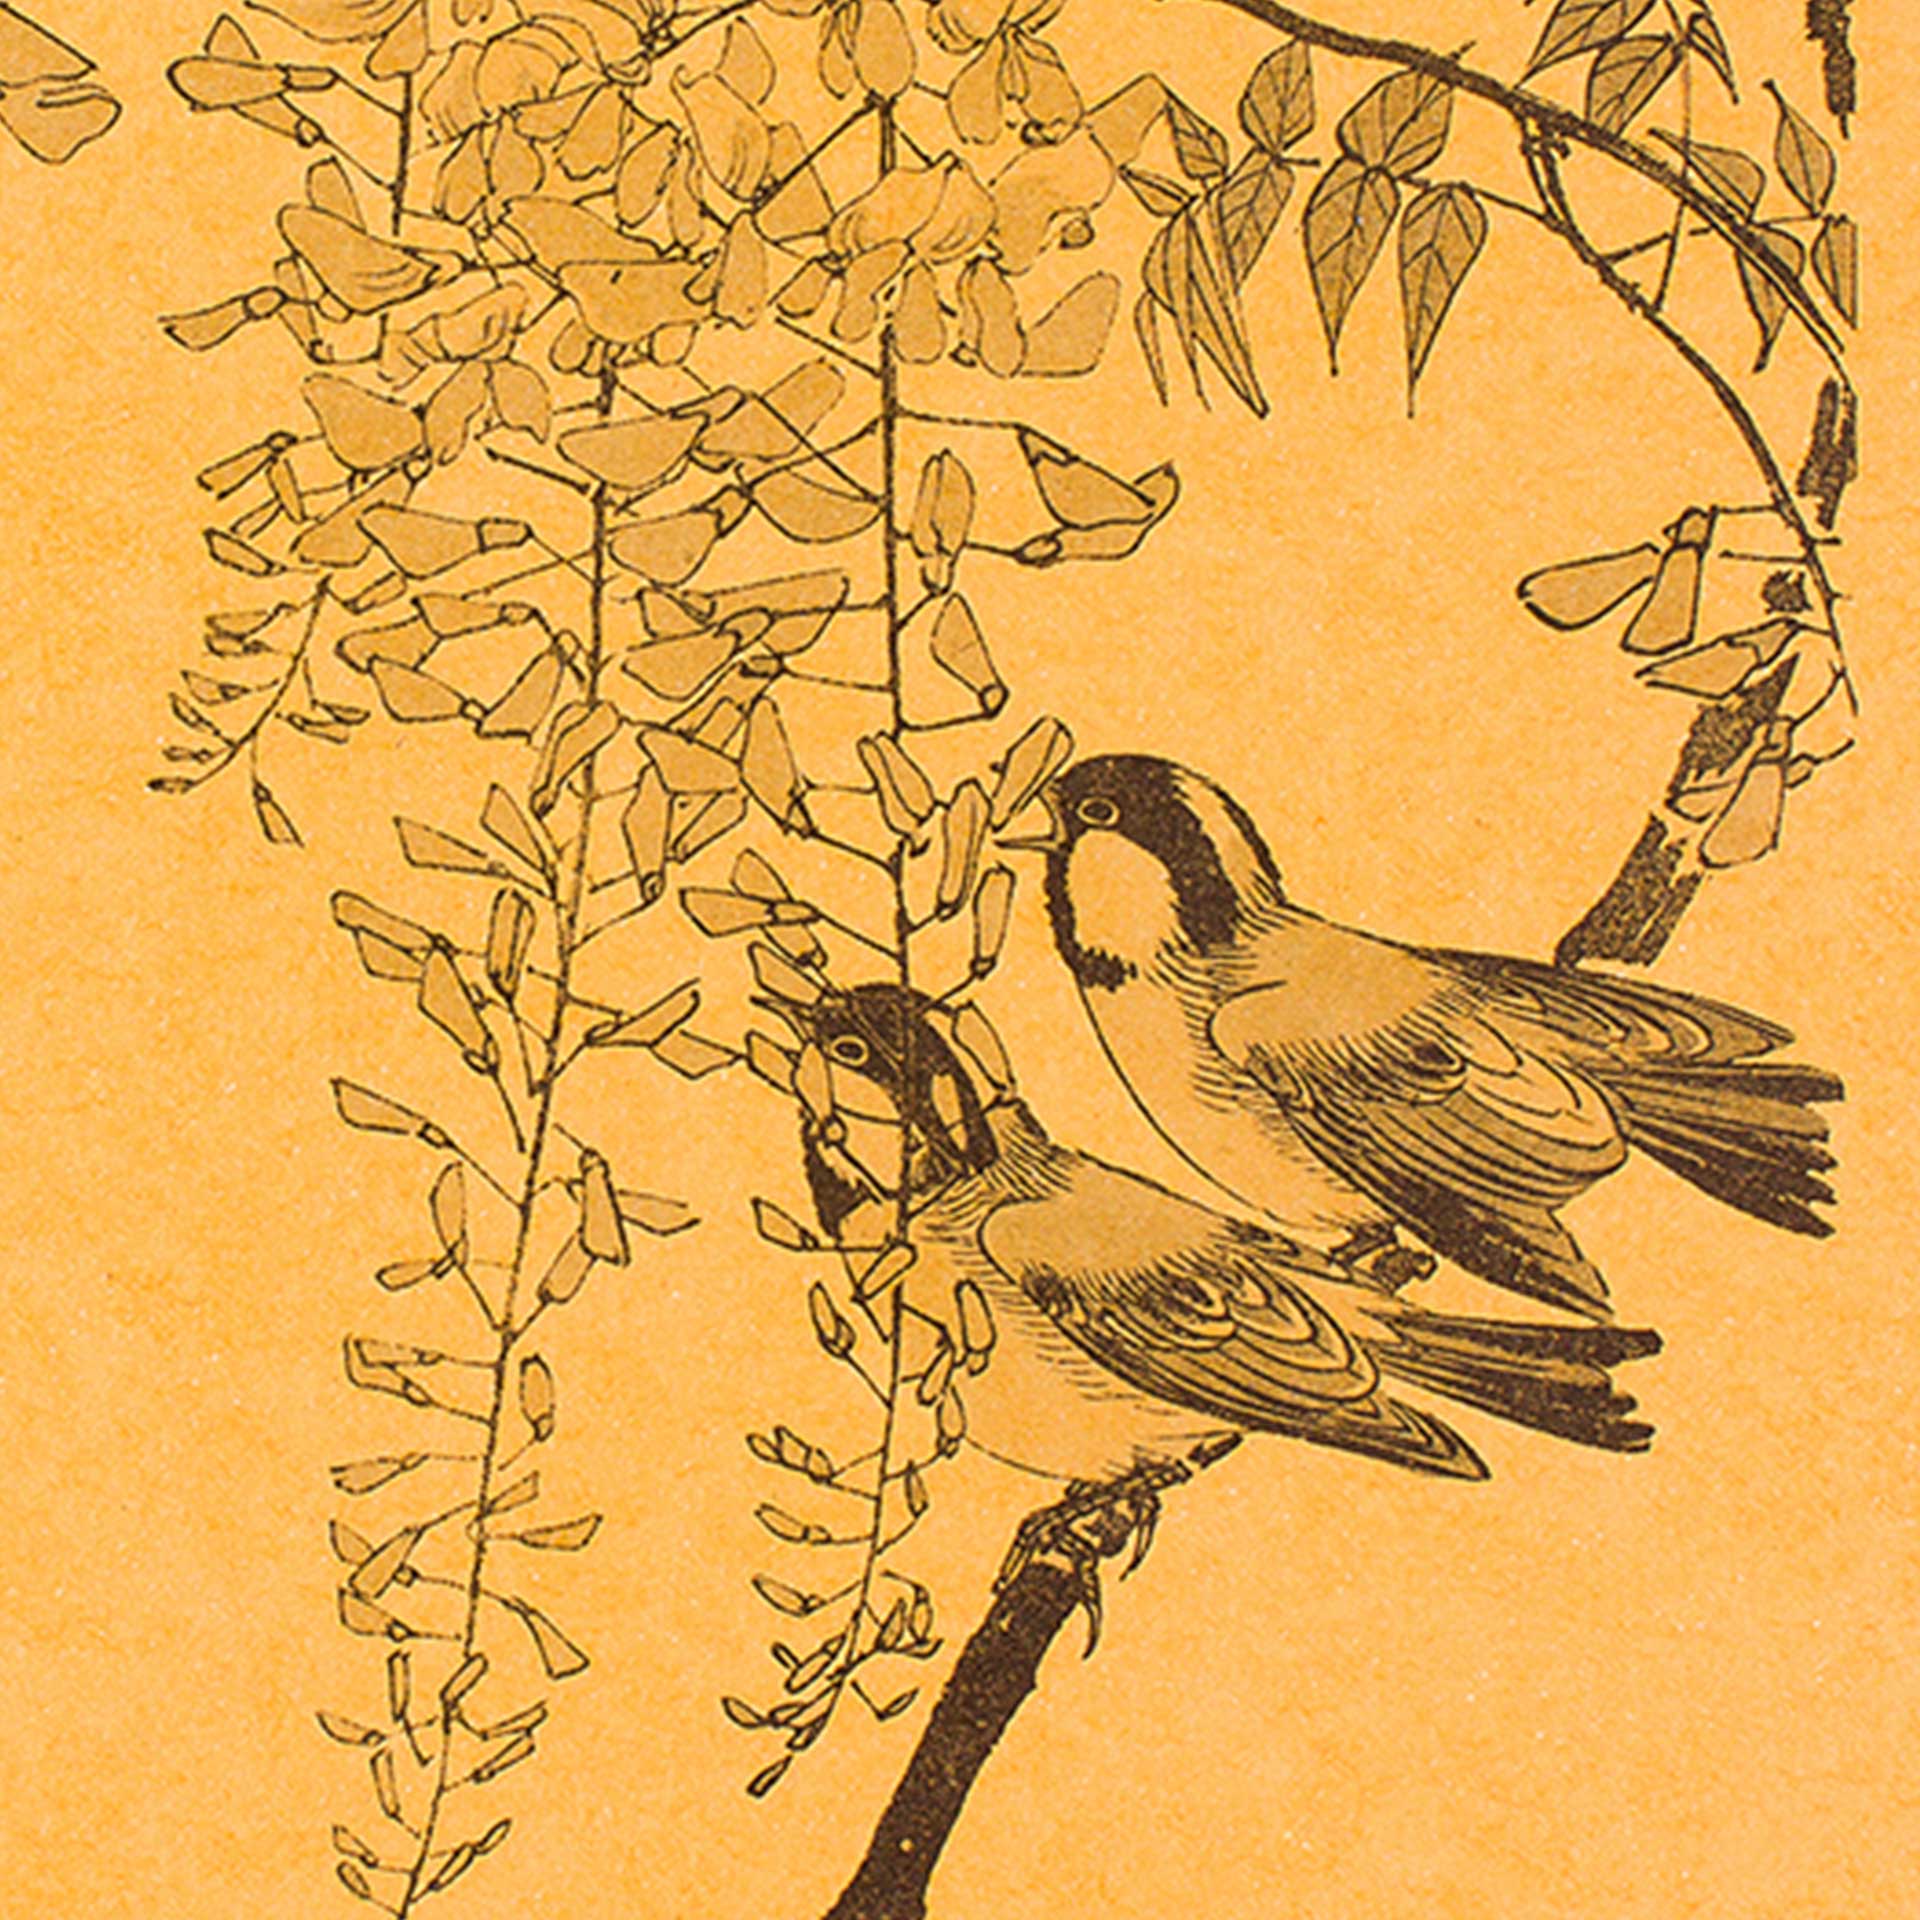 Closeup of small birds on a branch printed in brown and yellow